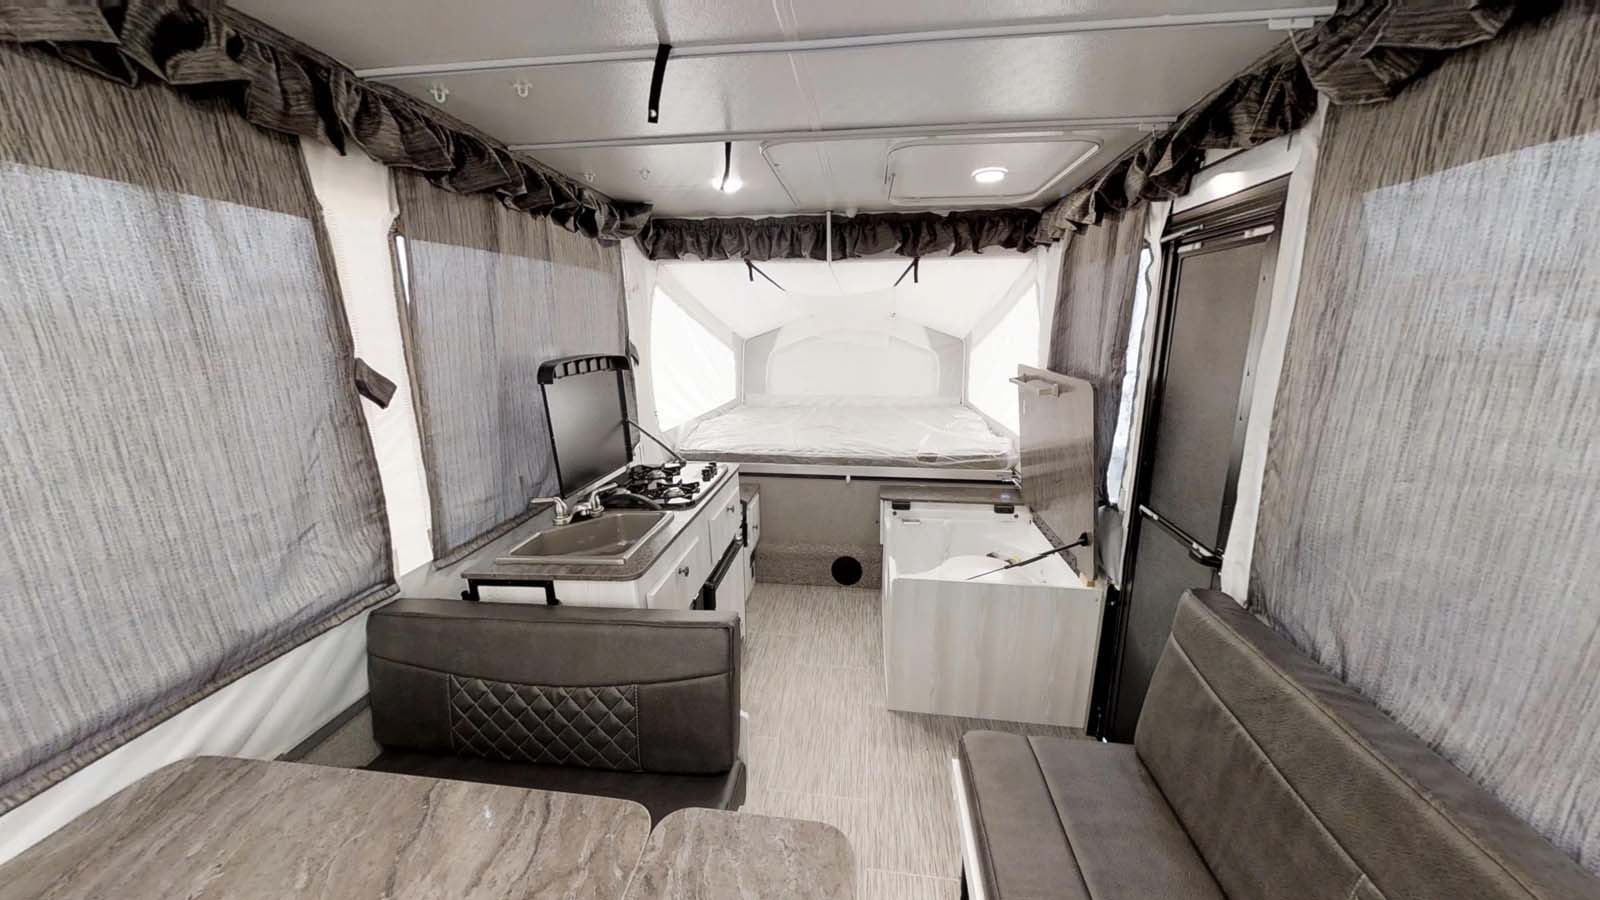 Pop Up Campers With Bathrooms In 2021, Do Pop Up Tent Trailers Have Bathrooms